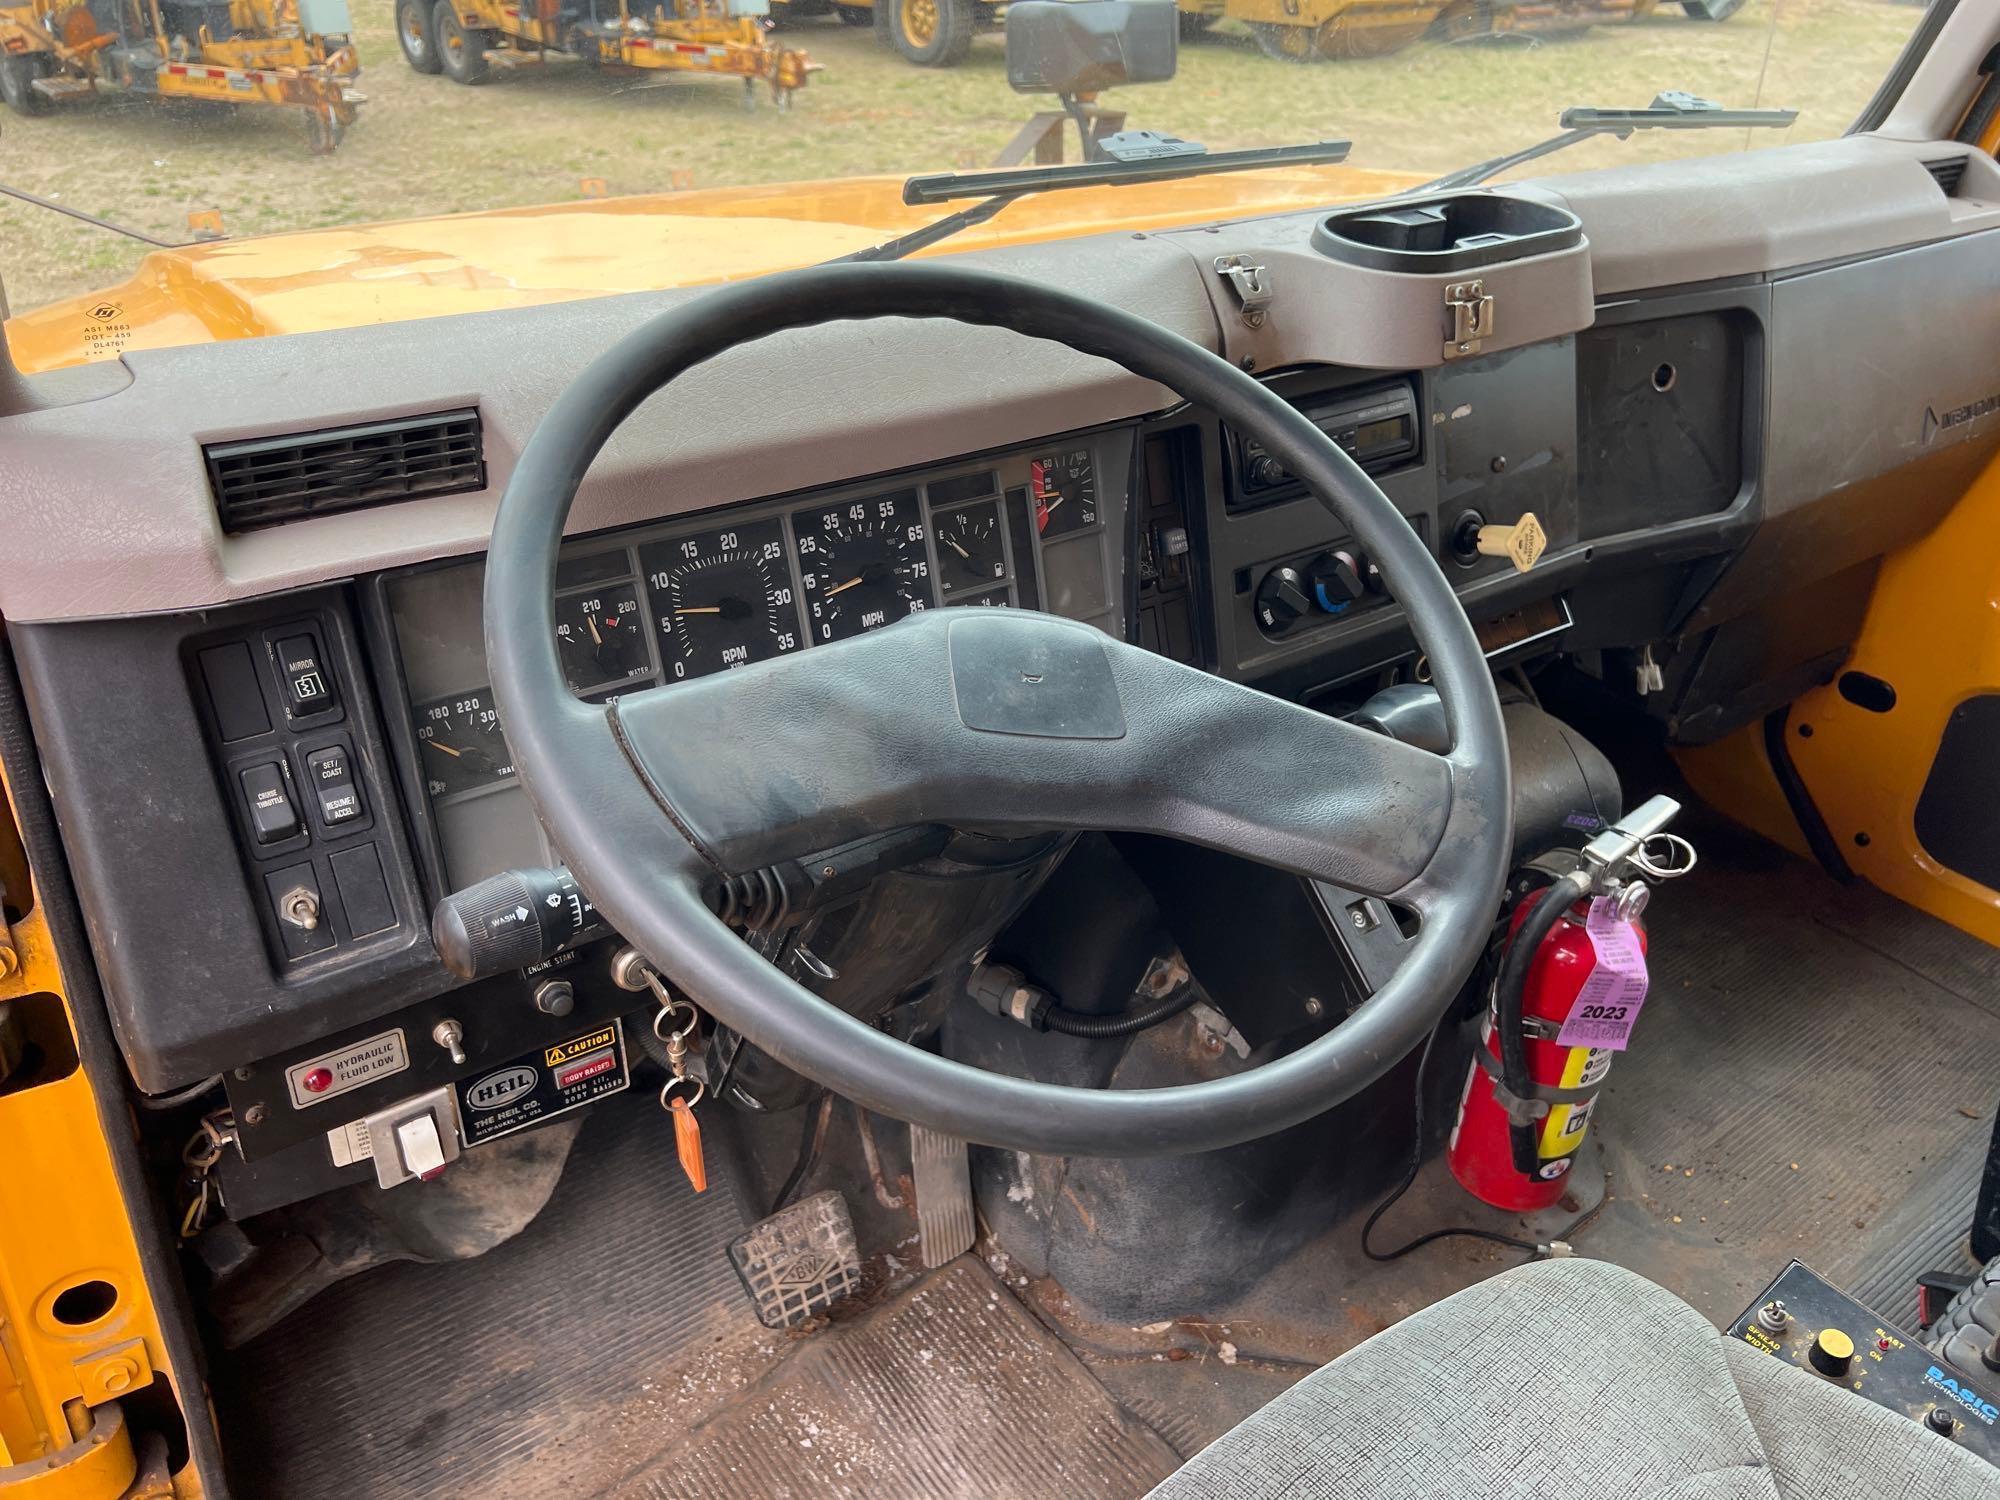 ... 1999... INTERNATIONAL 4900 DUMP TRUCK VN:684837...powered by DT466 diesel engine, equipped with